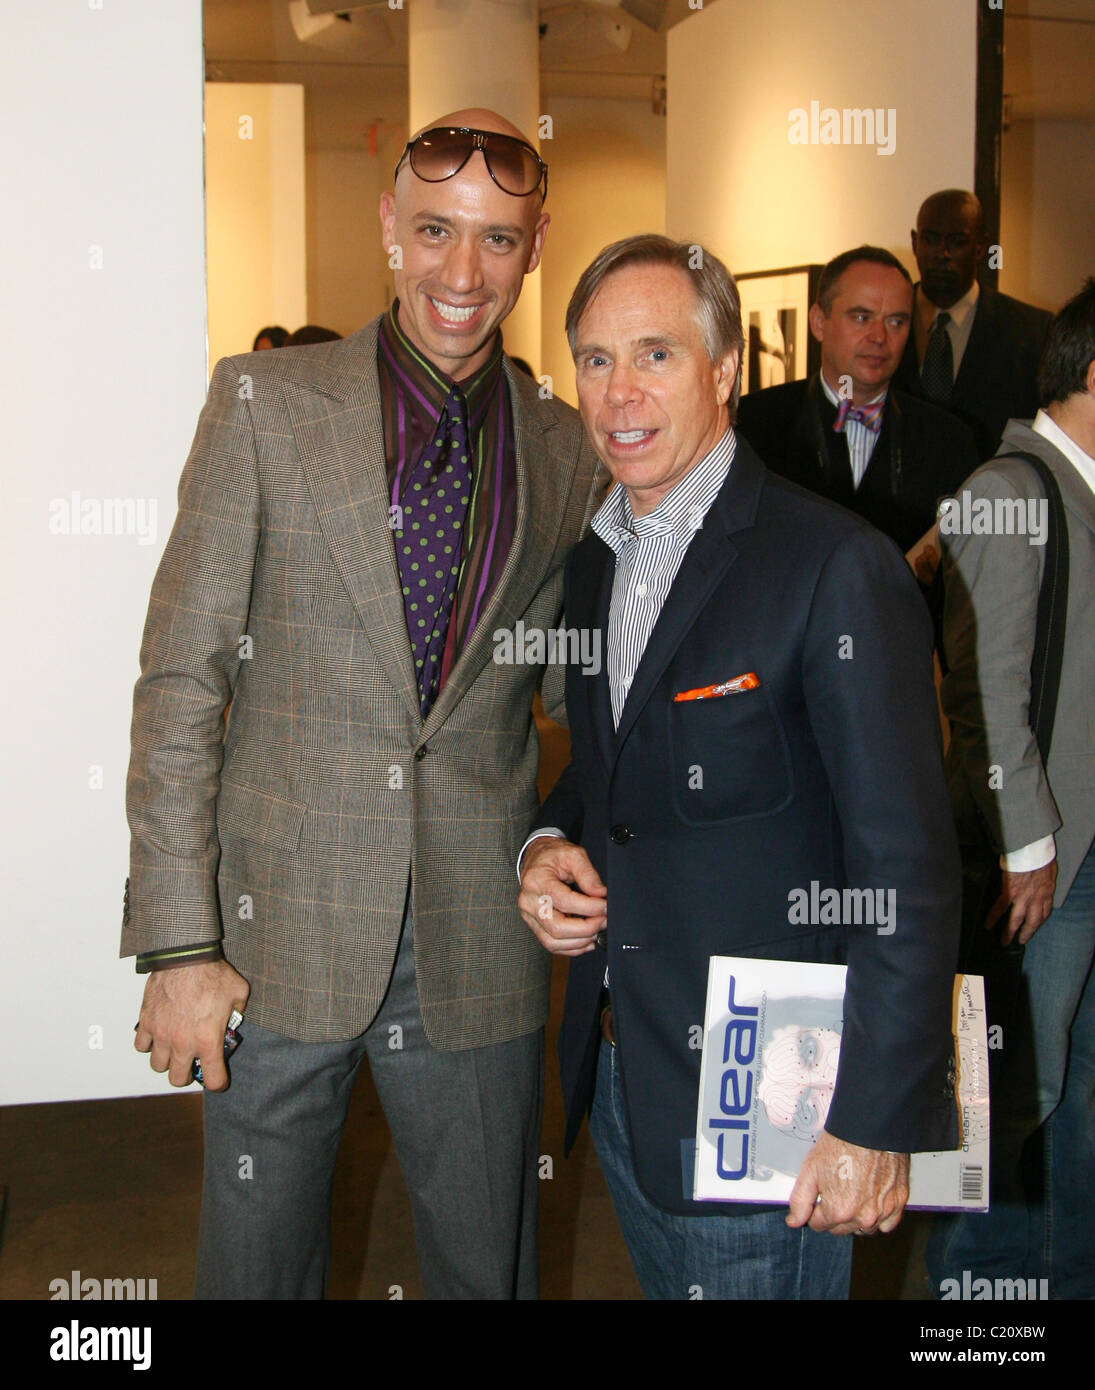 Robert Verdi and Tommy Hilfiger Launch of book project Fashion Etcetera by Sam Haskins hosted by Tommy Hilfiger at The Milk Stock Photo